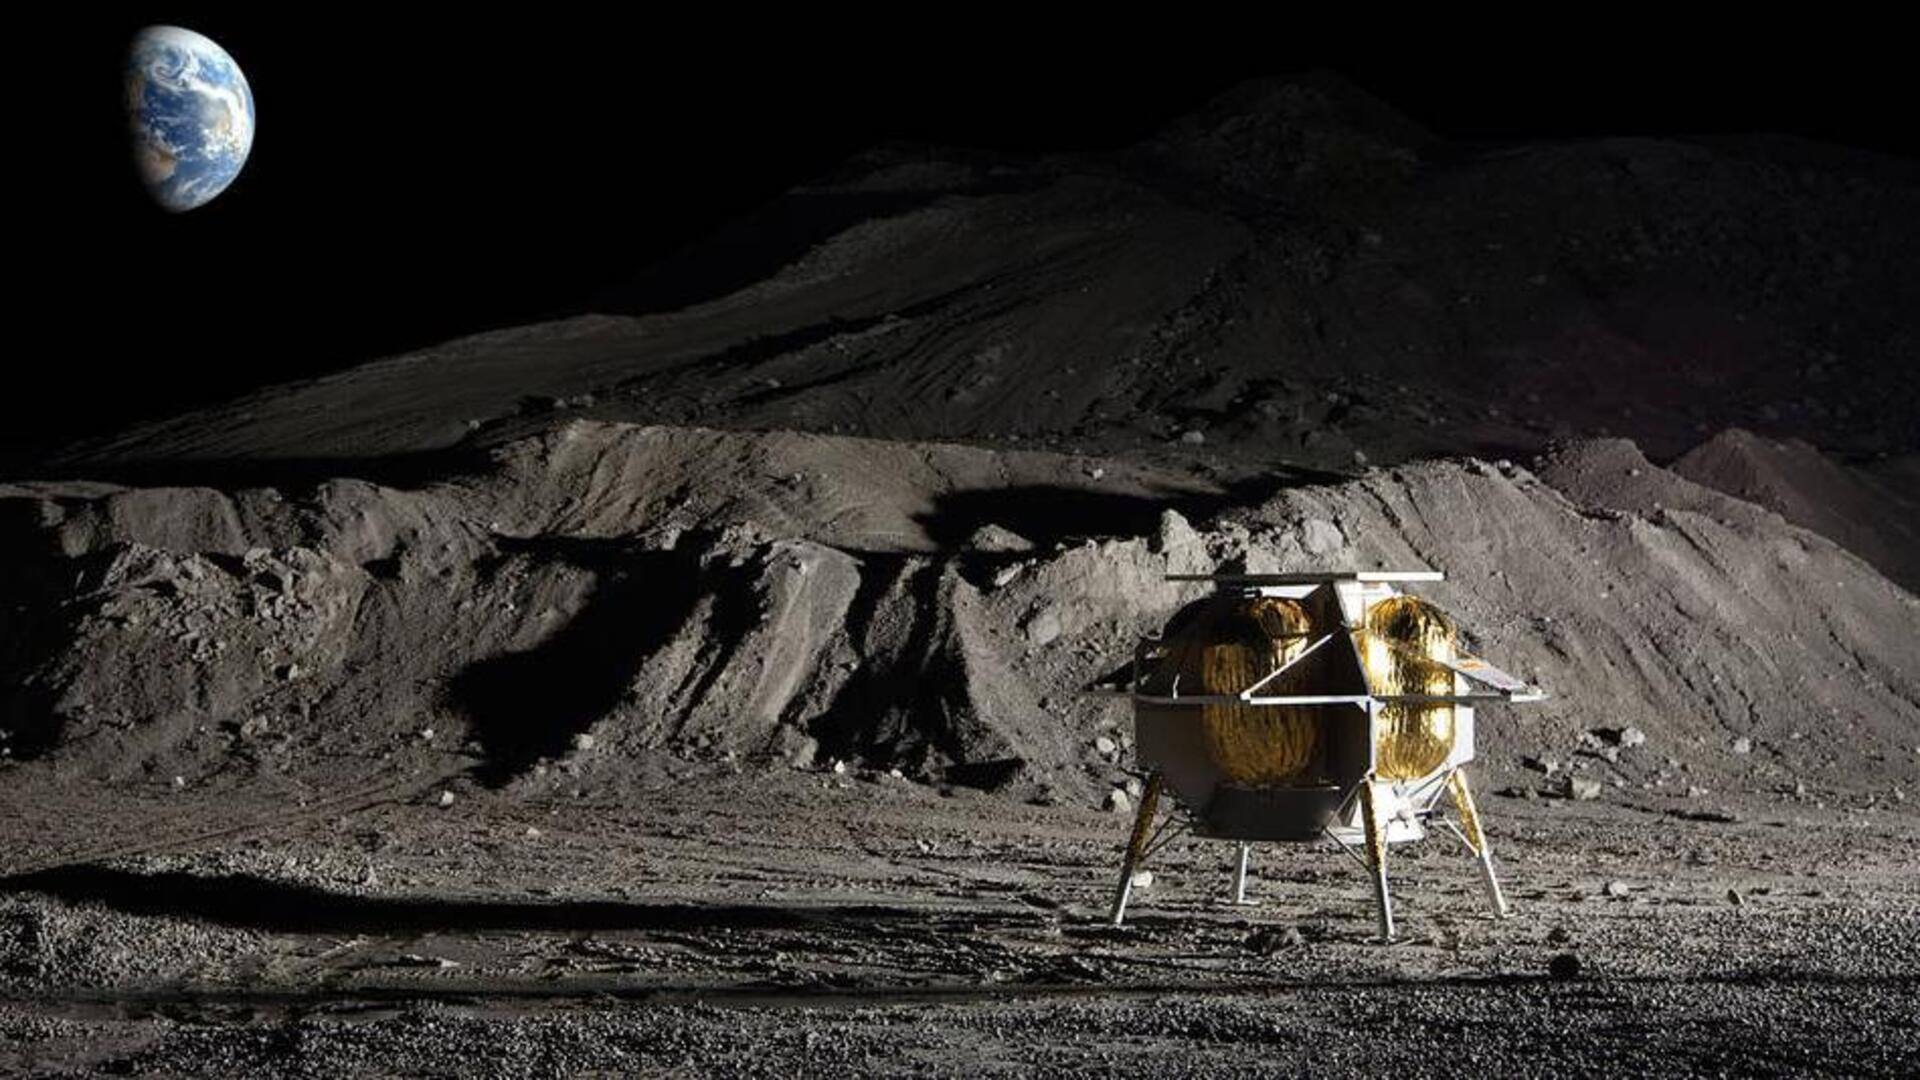 Astrobotic's Peregrine lunar lander to launch on January 8